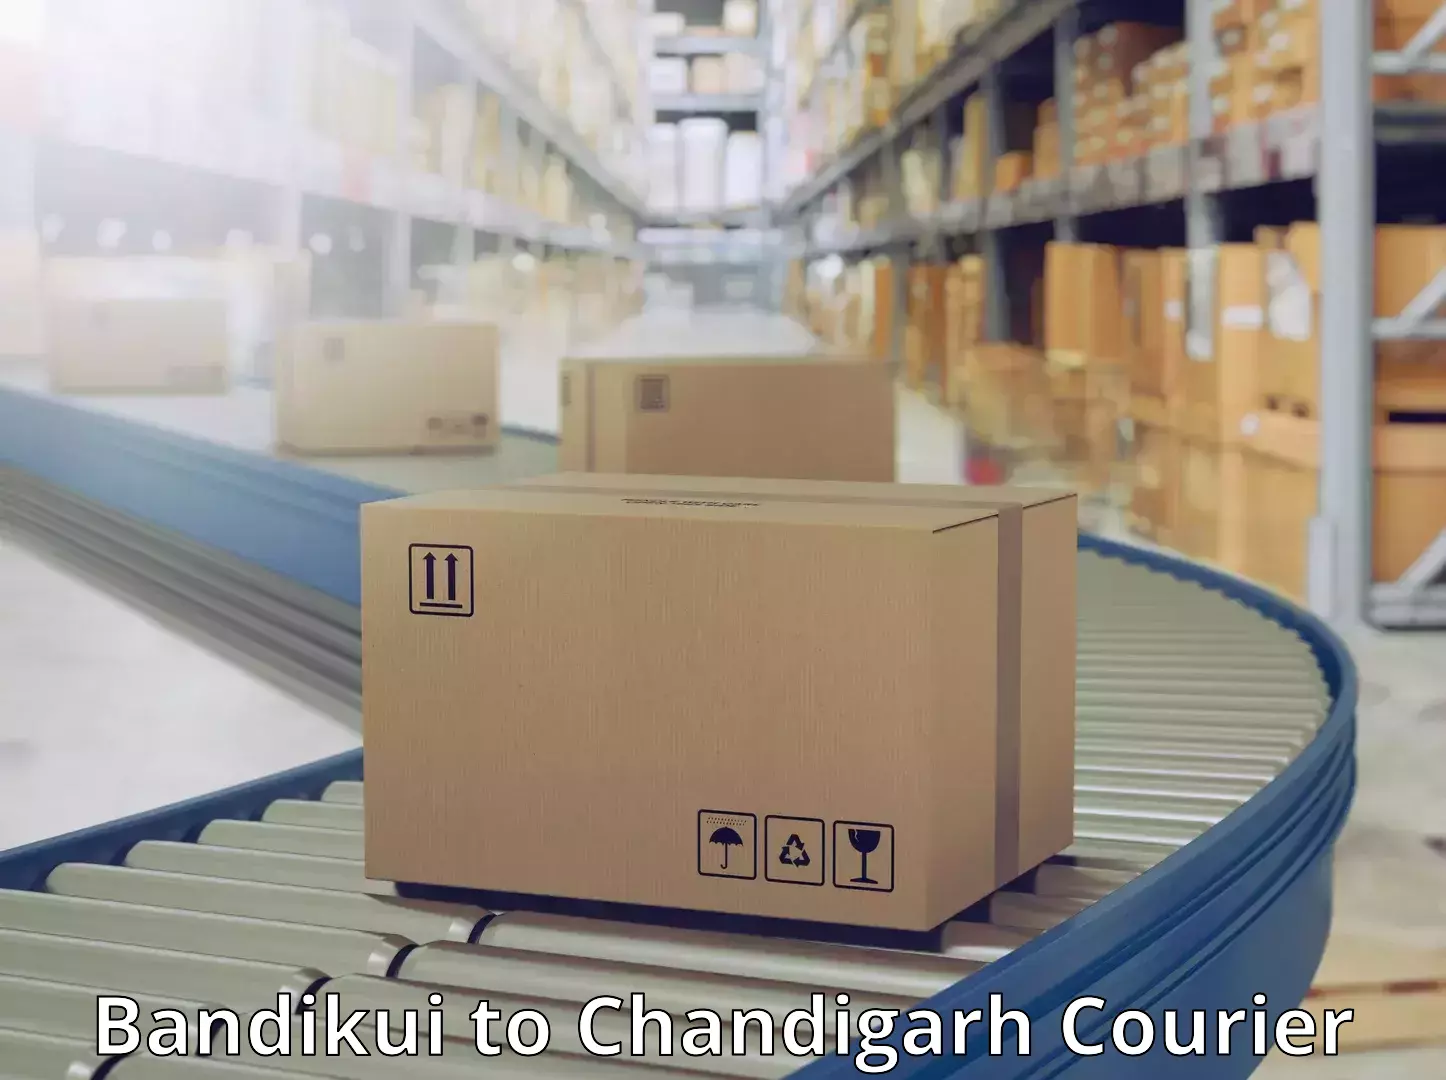 Sustainable delivery practices Bandikui to Chandigarh